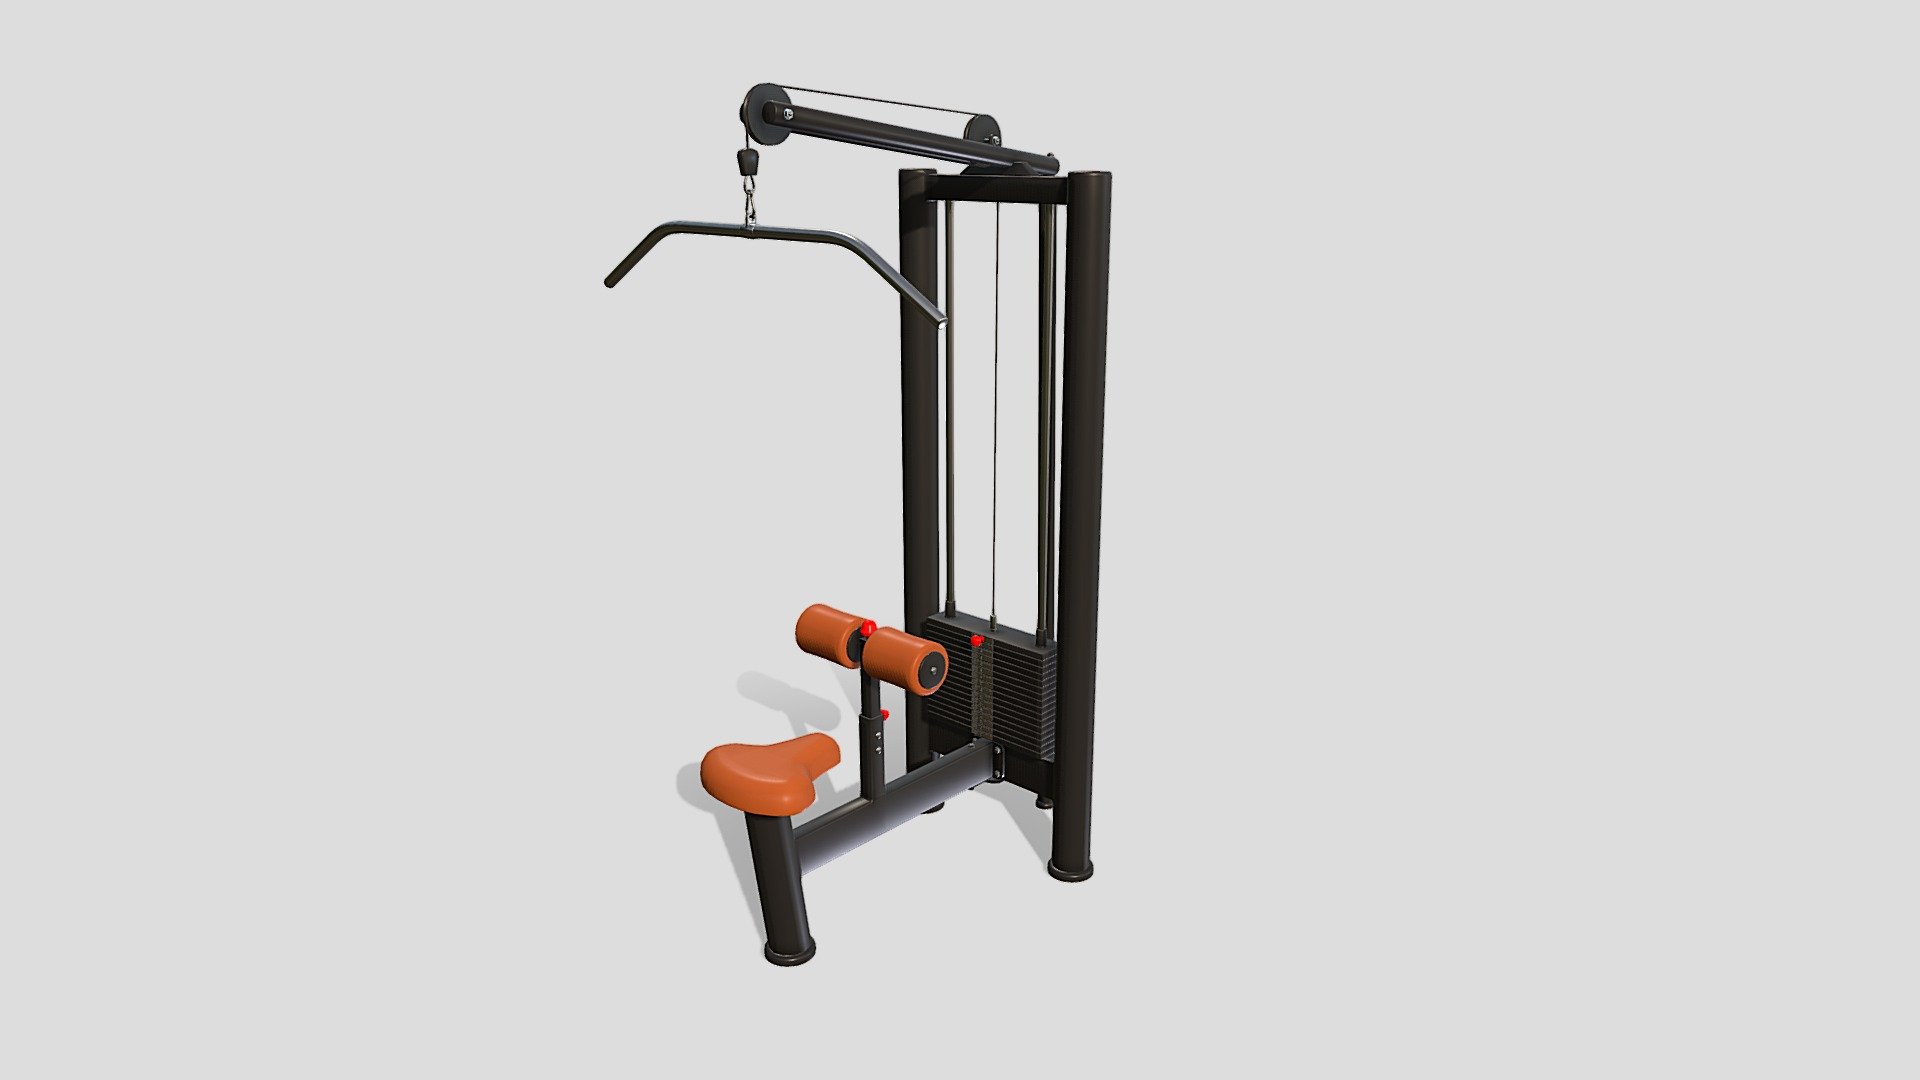 Gym machine 3d model built to real size, rendered with Cycles in Blender, as per seen on attached images. 

File formats:
-.blend, rendered with cycles, as seen in the images;
-.obj, with materials applied;
-.dae, with materials applied;
-.fbx, with materials applied;
-.stl;

Files come named appropriately and split by file format.

3D Software:
The 3D model was originally created in Blender 3.1 and rendered with Cycles.

Materials and textures:
The models have materials applied in all formats, and are ready to import and render.
Materials are image based using PBR, the model comes with four 4k png image textures.

Preview scenes:
The preview images are rendered in Blender using its built-in render engine &lsquo;Cycles'.
Note that the blend files come directly with the rendering scene included and the render command will generate the exact result as seen in previews.

General:
The models are built mostly out of quads.

For any problems please feel free to contact me.

Don't forget to rate and enjoy! - Lat Machine - Buy Royalty Free 3D model by dragosburian 3d model